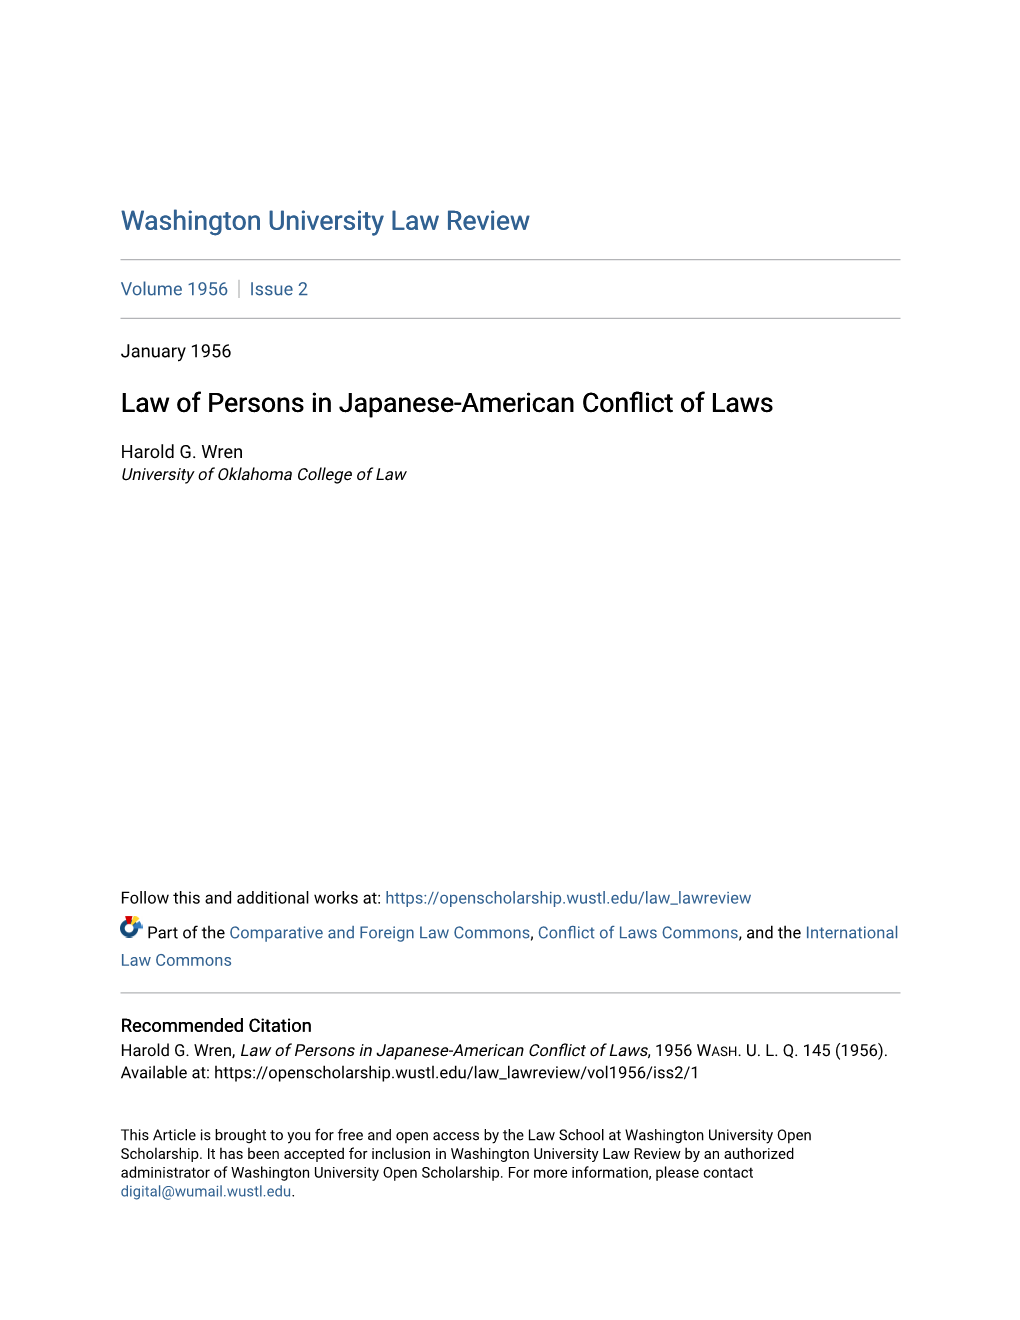 Law of Persons in Japanese-American Conflict of Laws